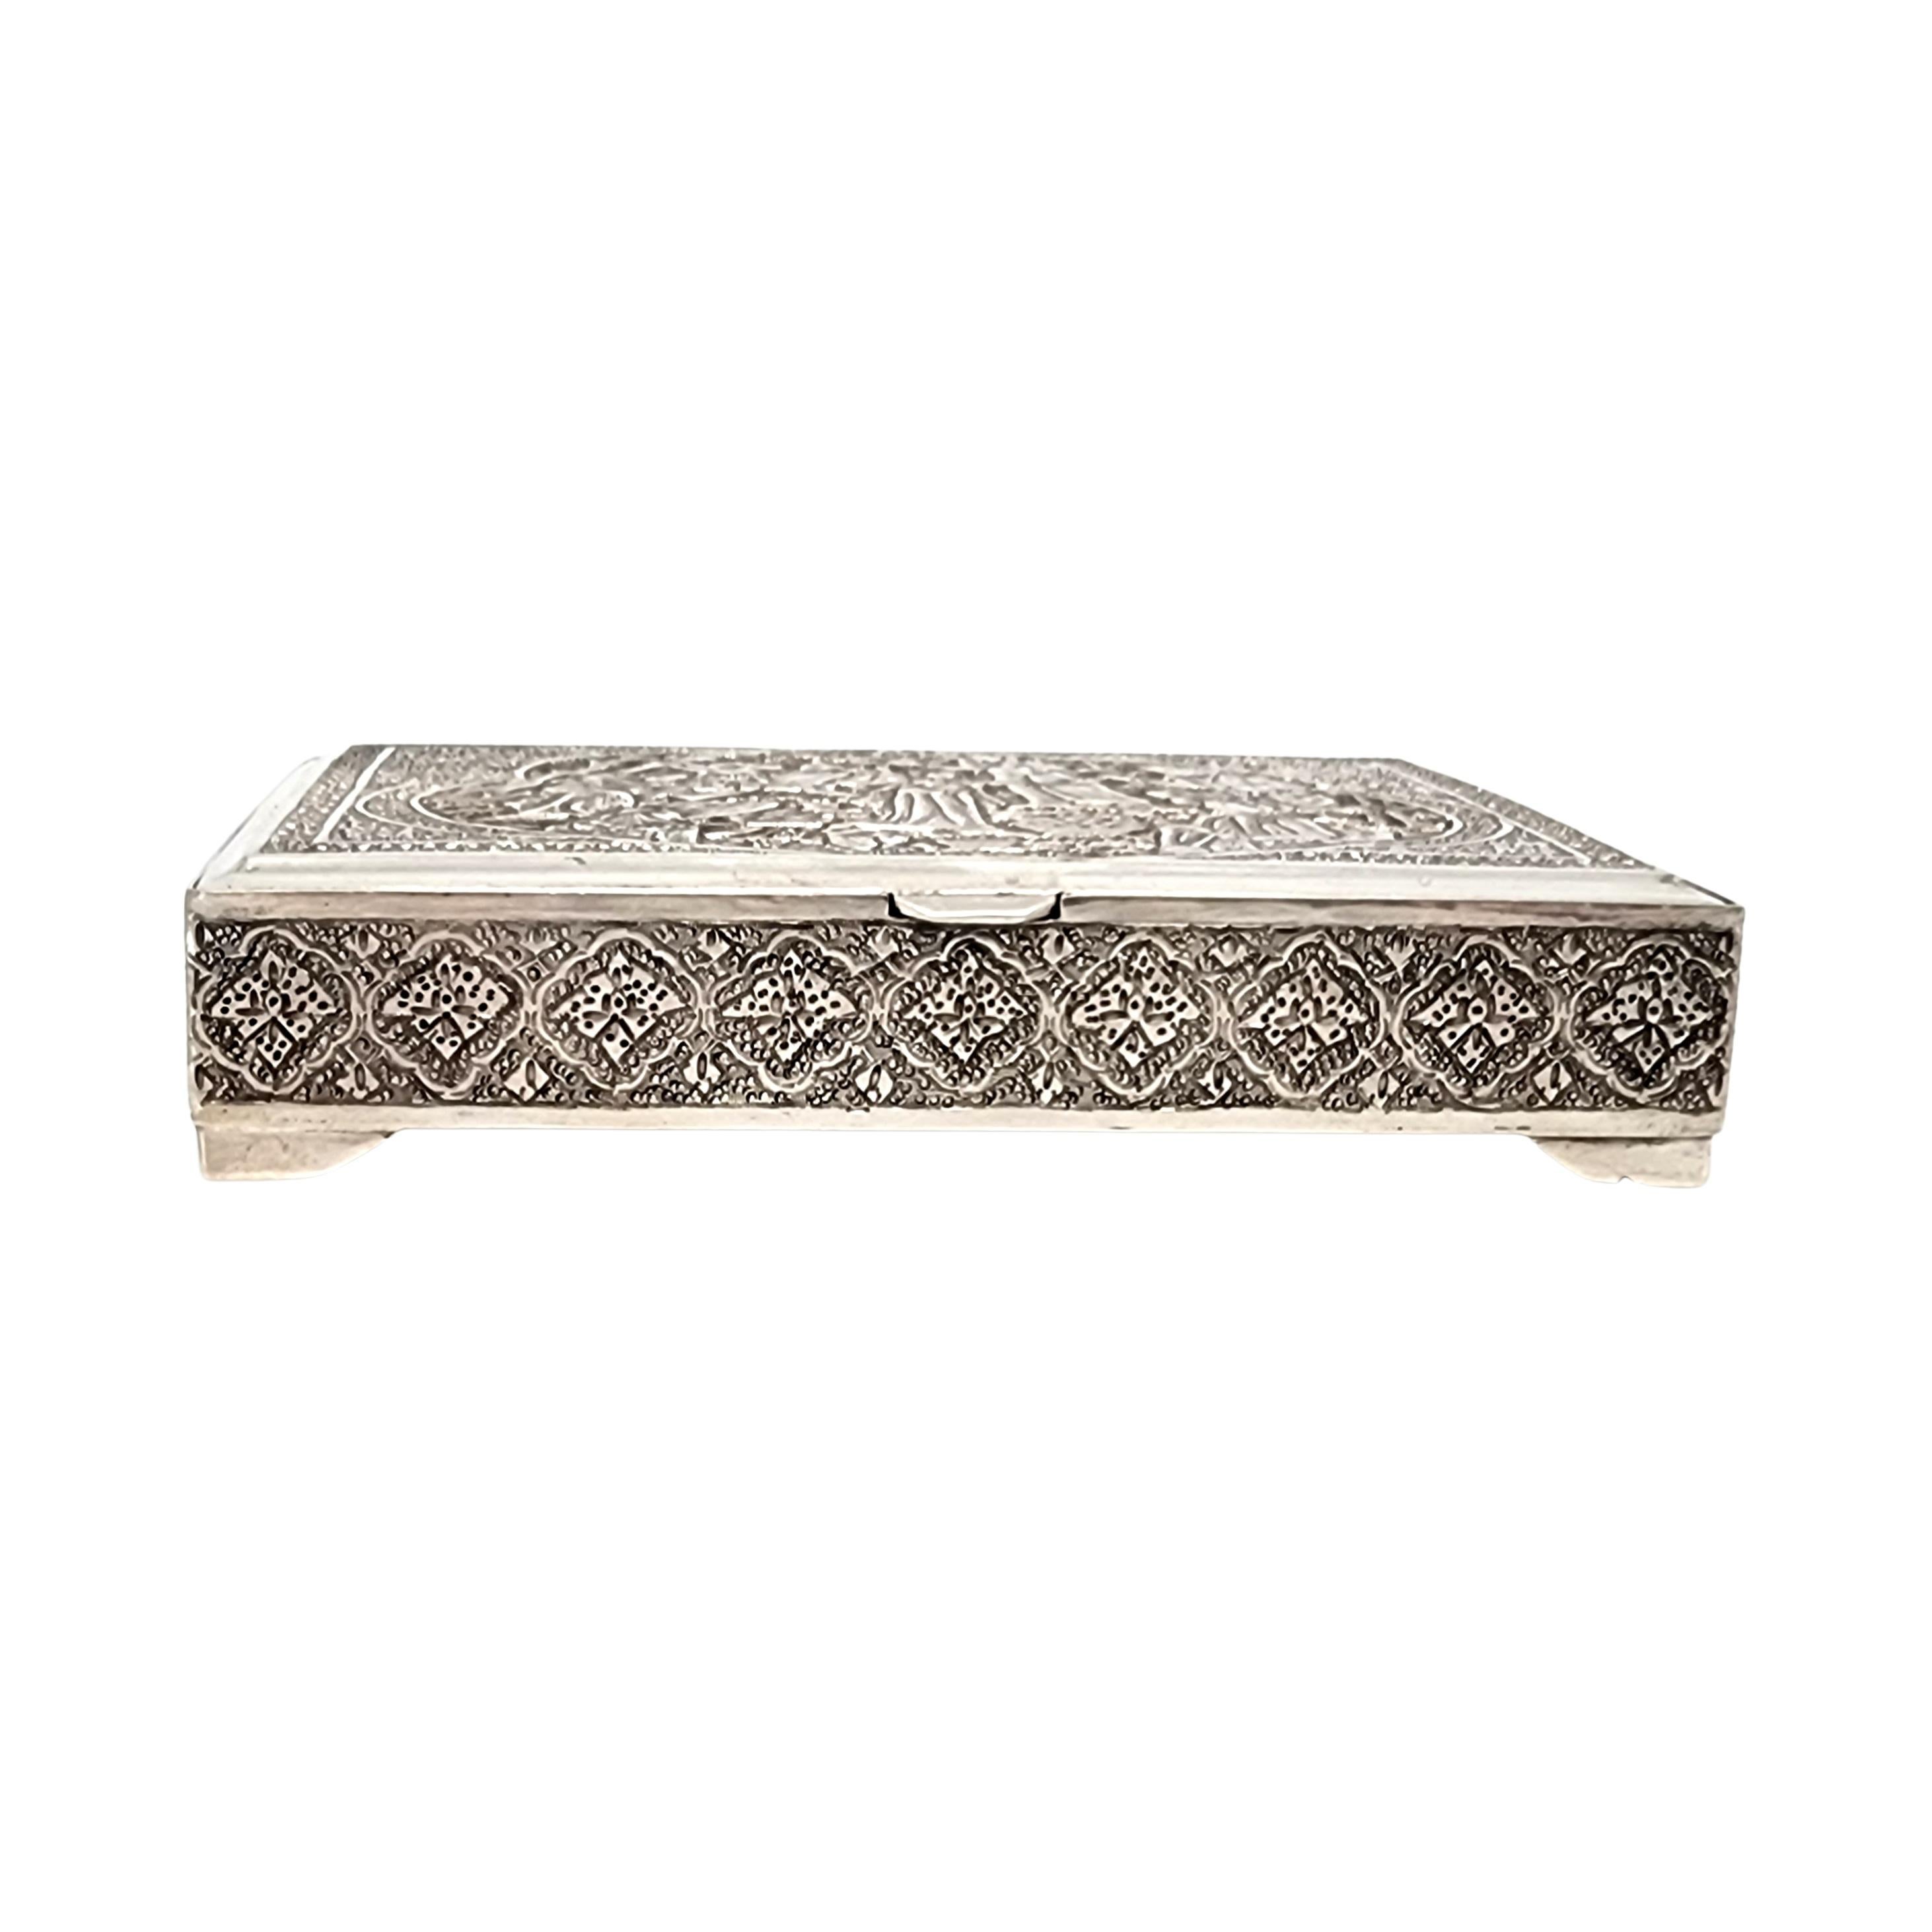 Middle Eastern Persian Silver Box For Sale 6